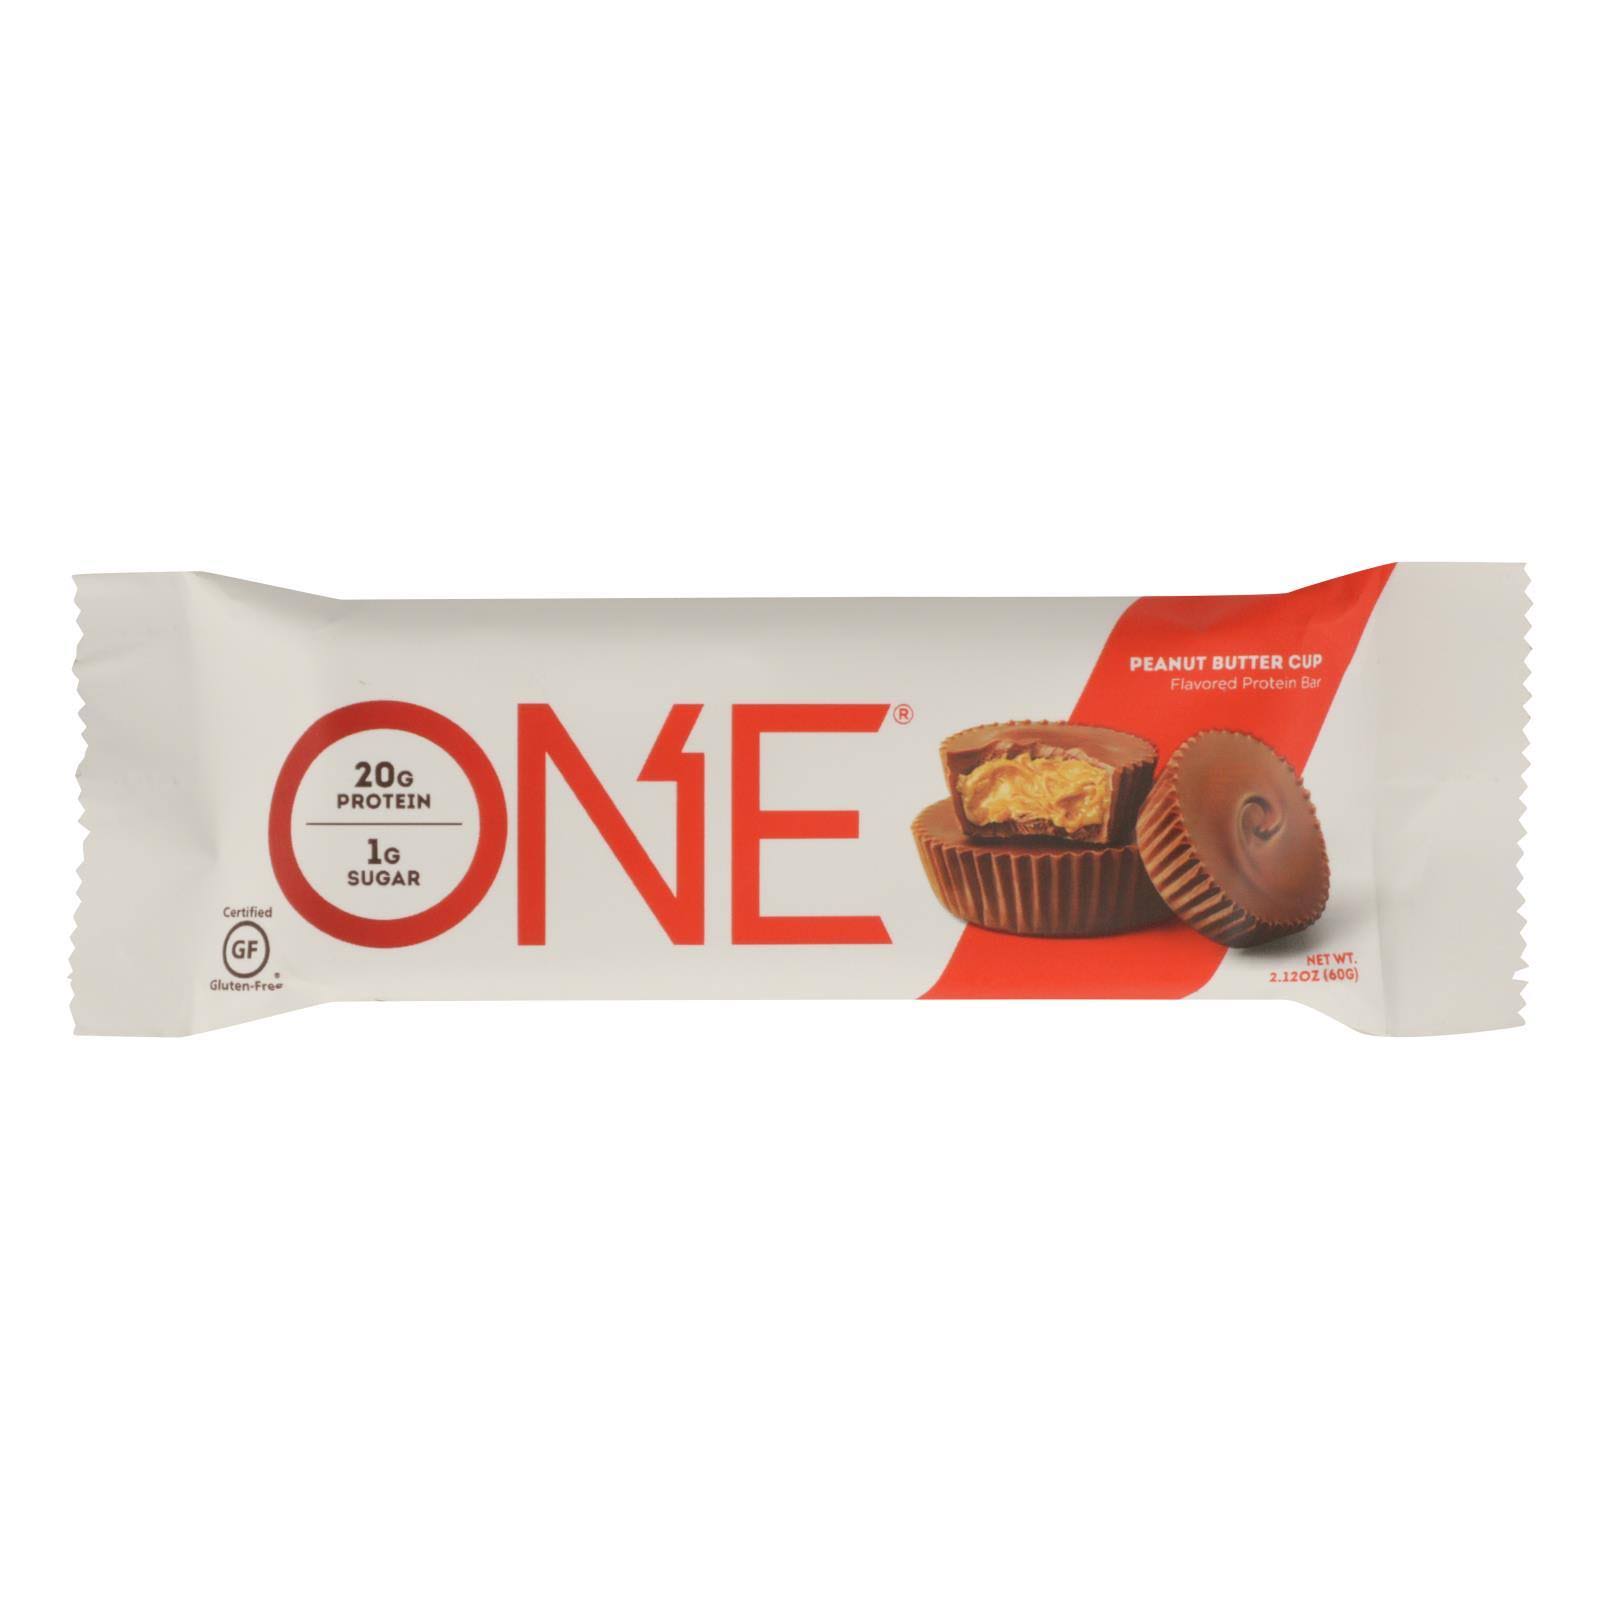 ONE Protein Bar Peanut Butter Cup